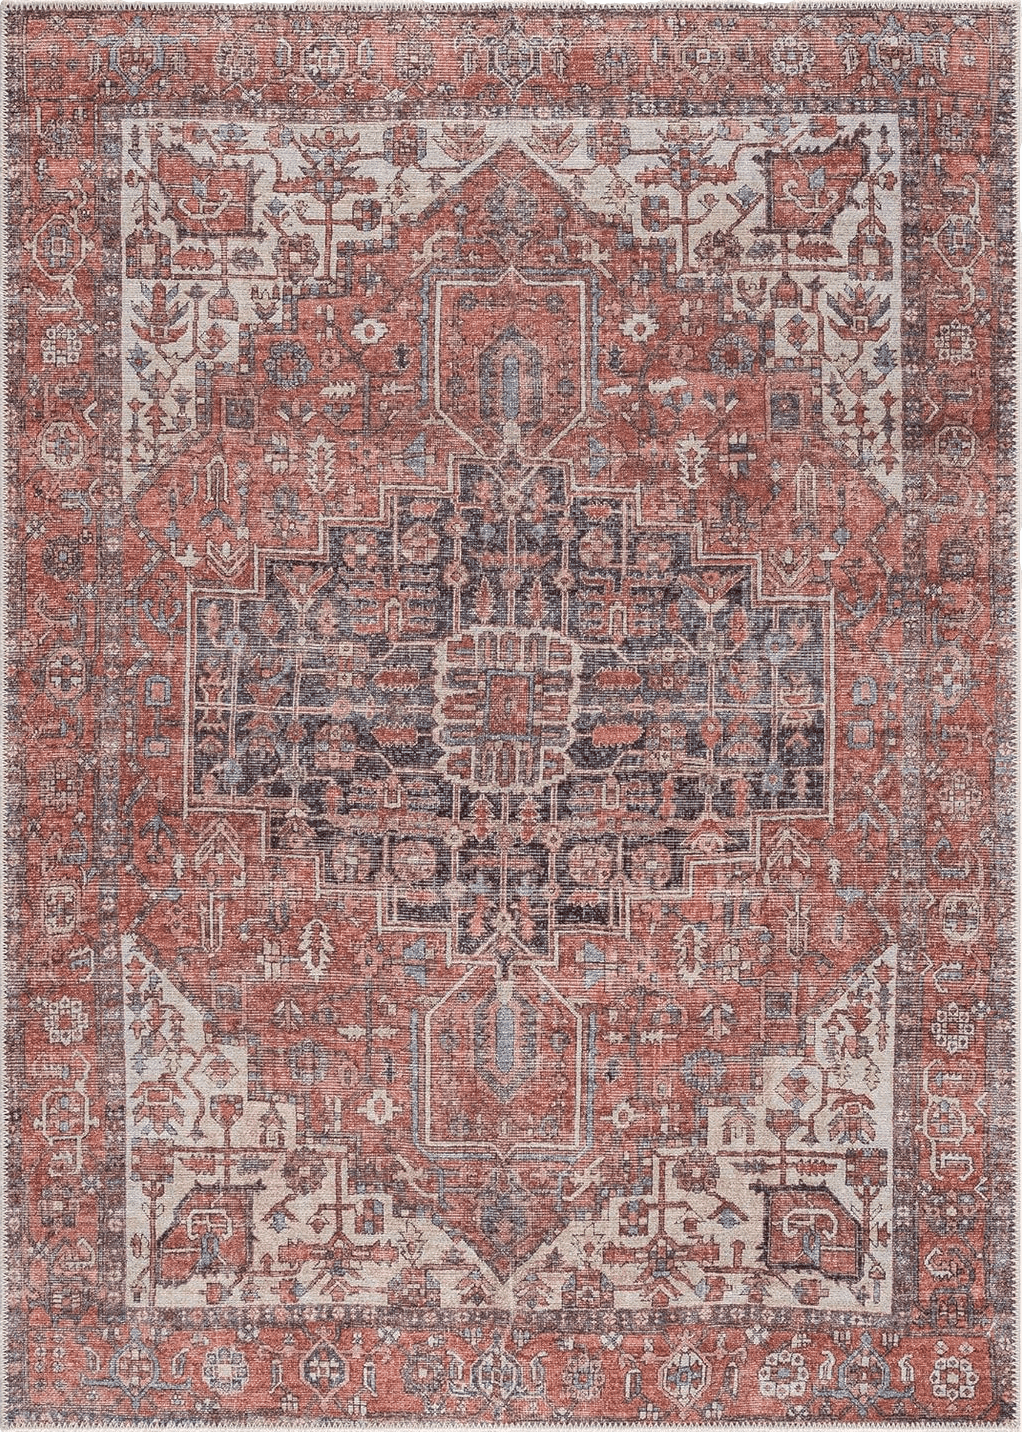 Bohemian Red Bloom Rugs Washable 4' x 6' Rug - Red/Orange/Beige Traditional Area Rug for Living Room, Bedroom, Dining Room, and Kitchen - Exact Size: 4' x 6'